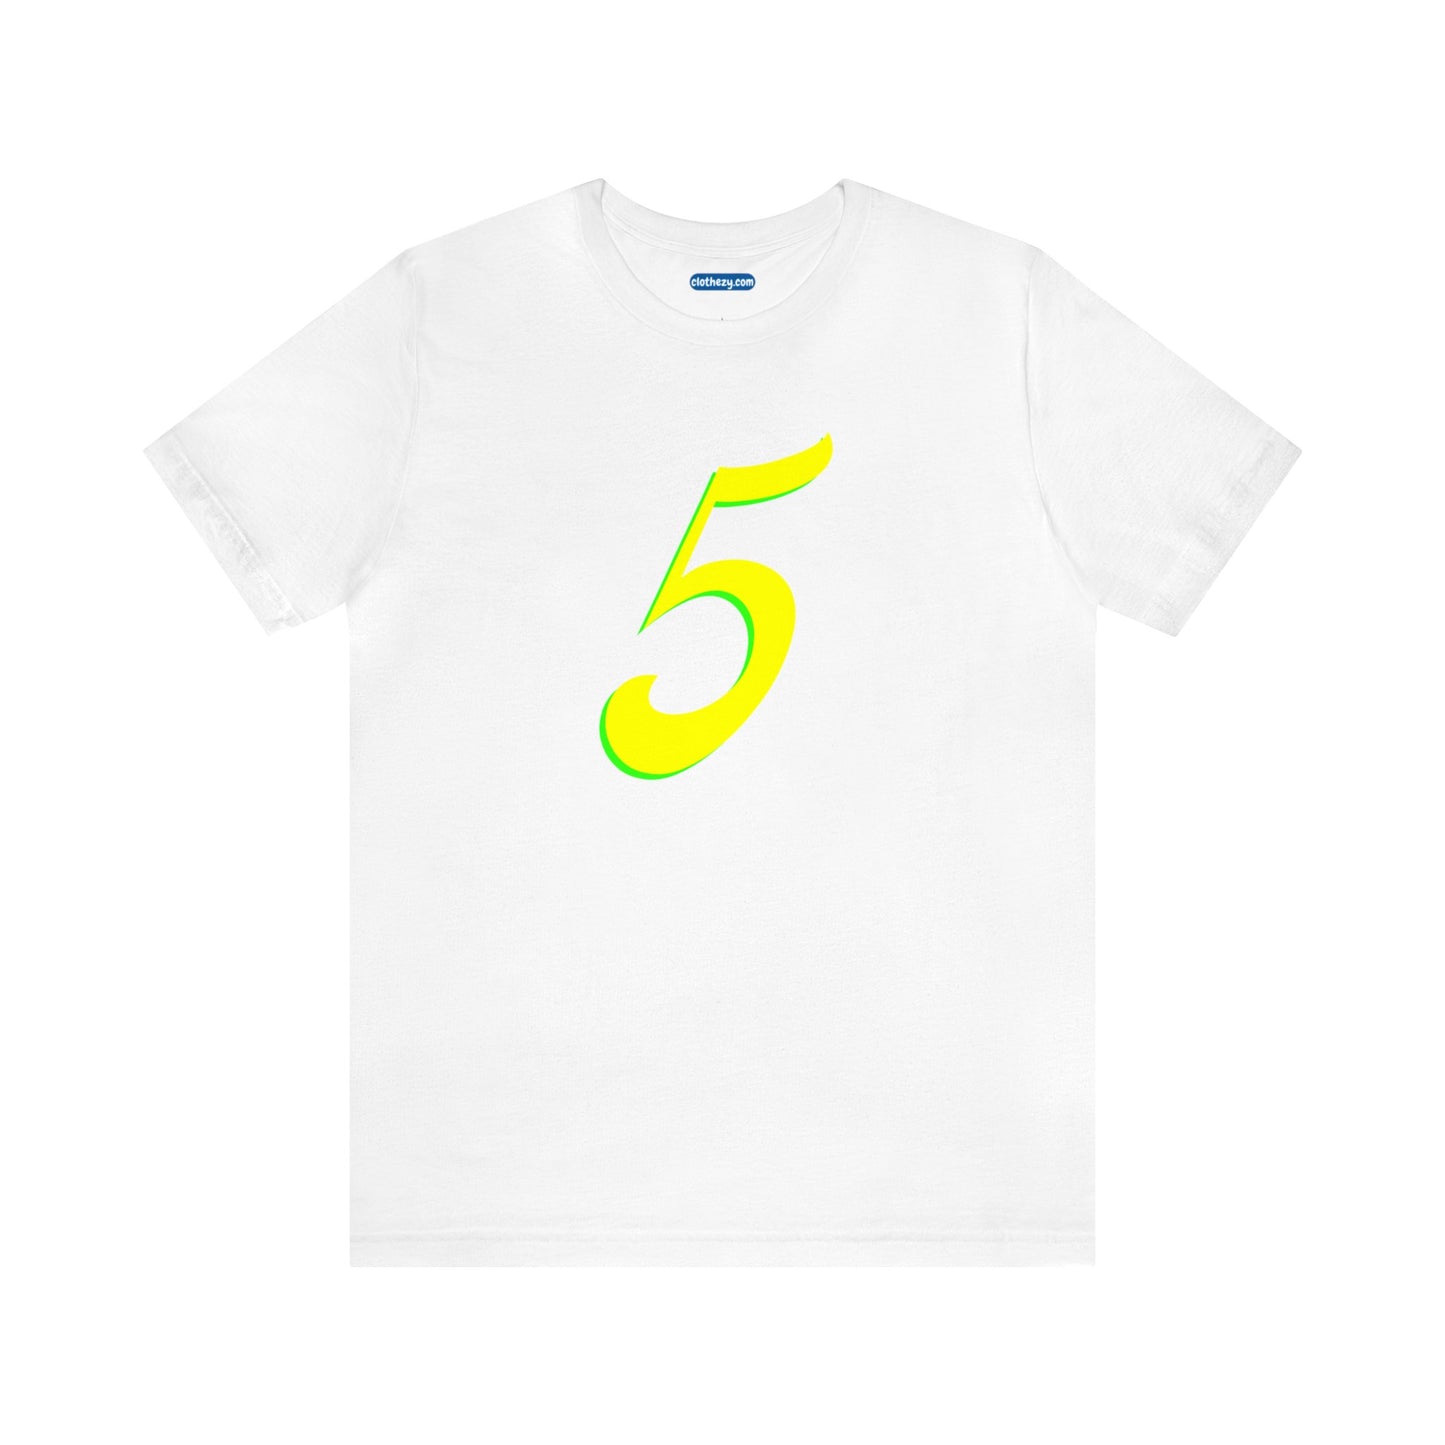 Number 5 Design - Soft Cotton Tee for birthdays and celebrations, Gift for friends and family, Multiple Options by clothezy.com in White Size Small - Buy Now